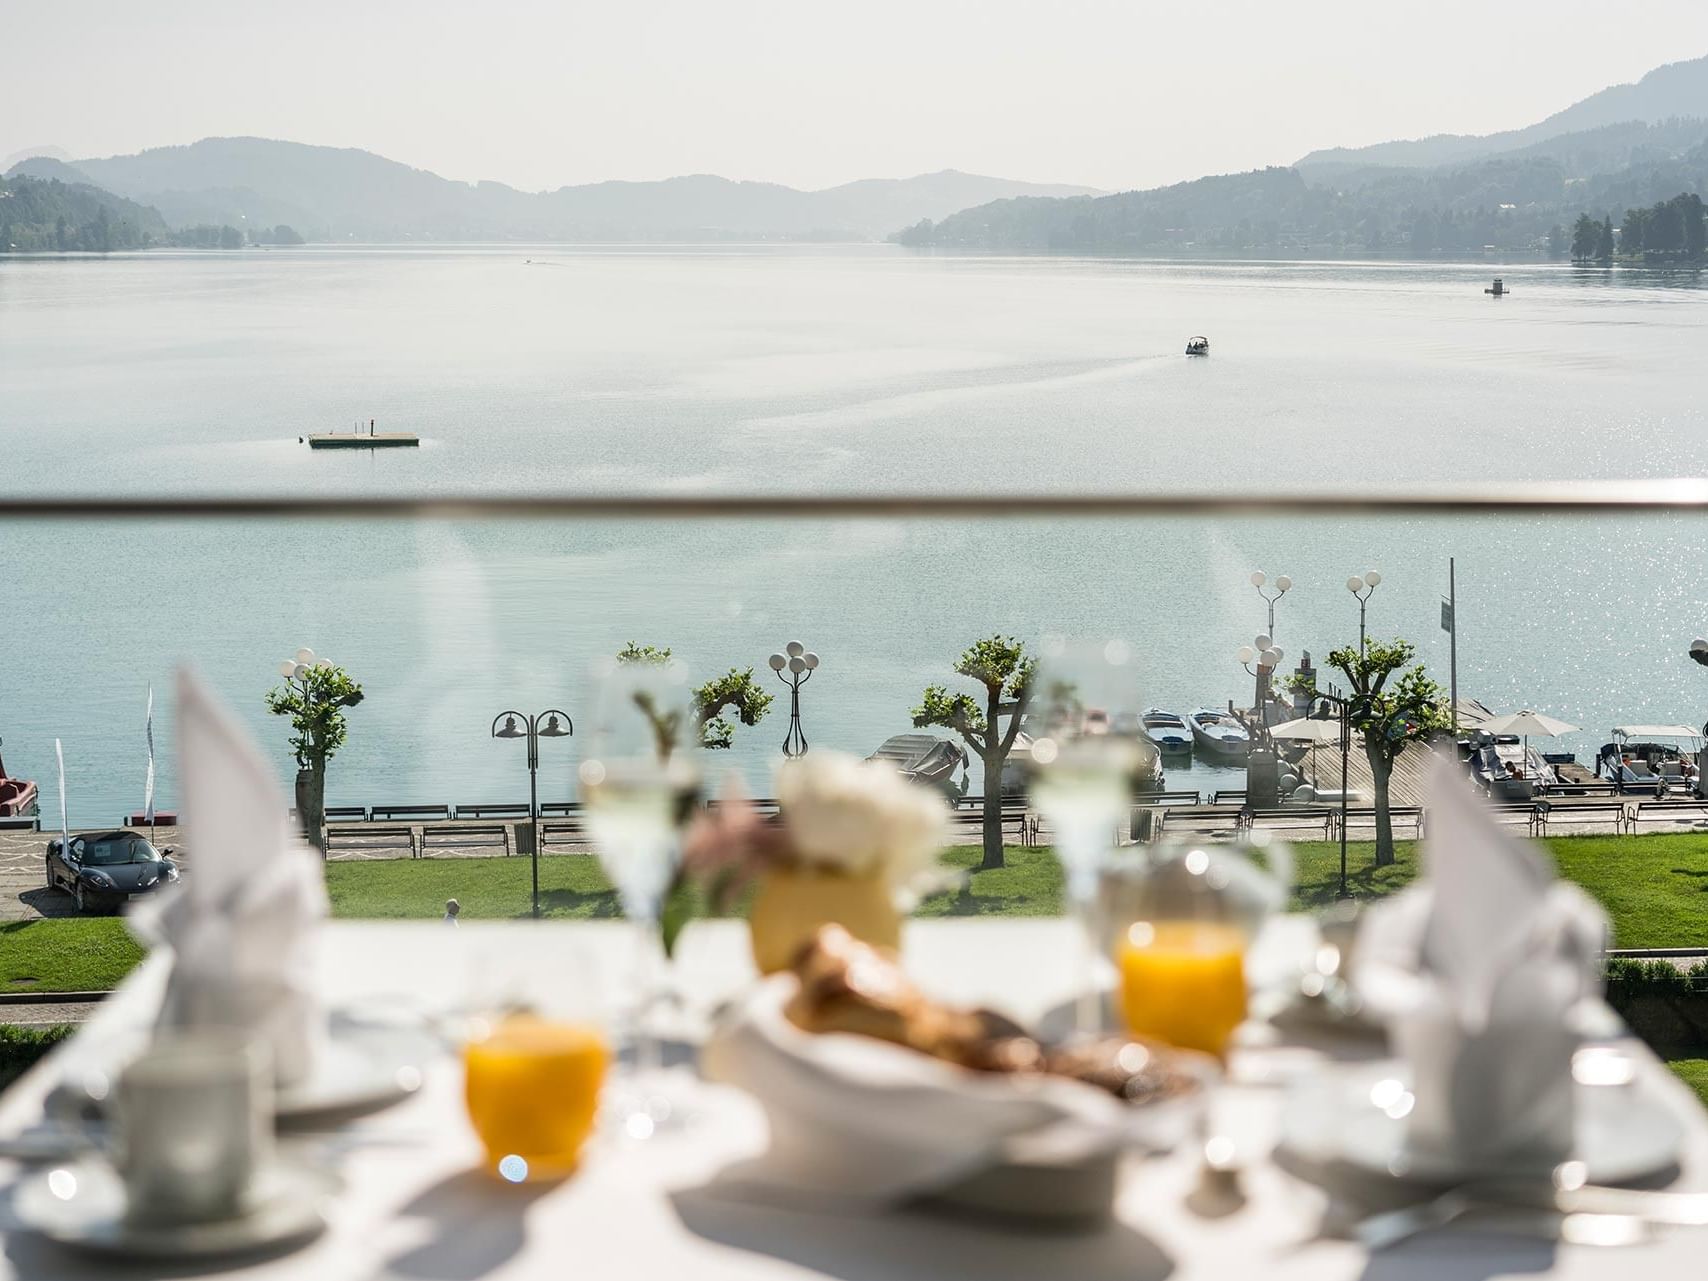 Sea view from a breakfast table at Falkensteiner Hotels